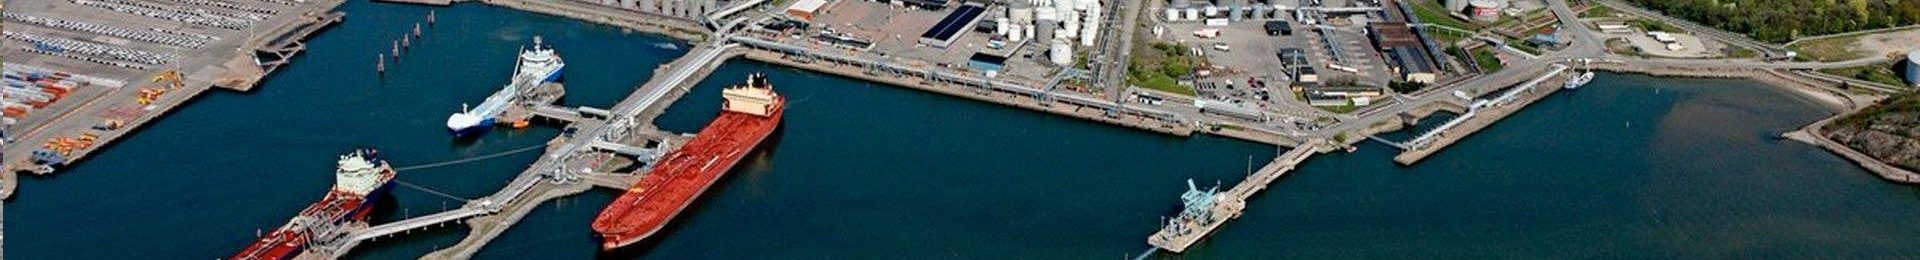 LNG project broadview energy solutions supply swedegas